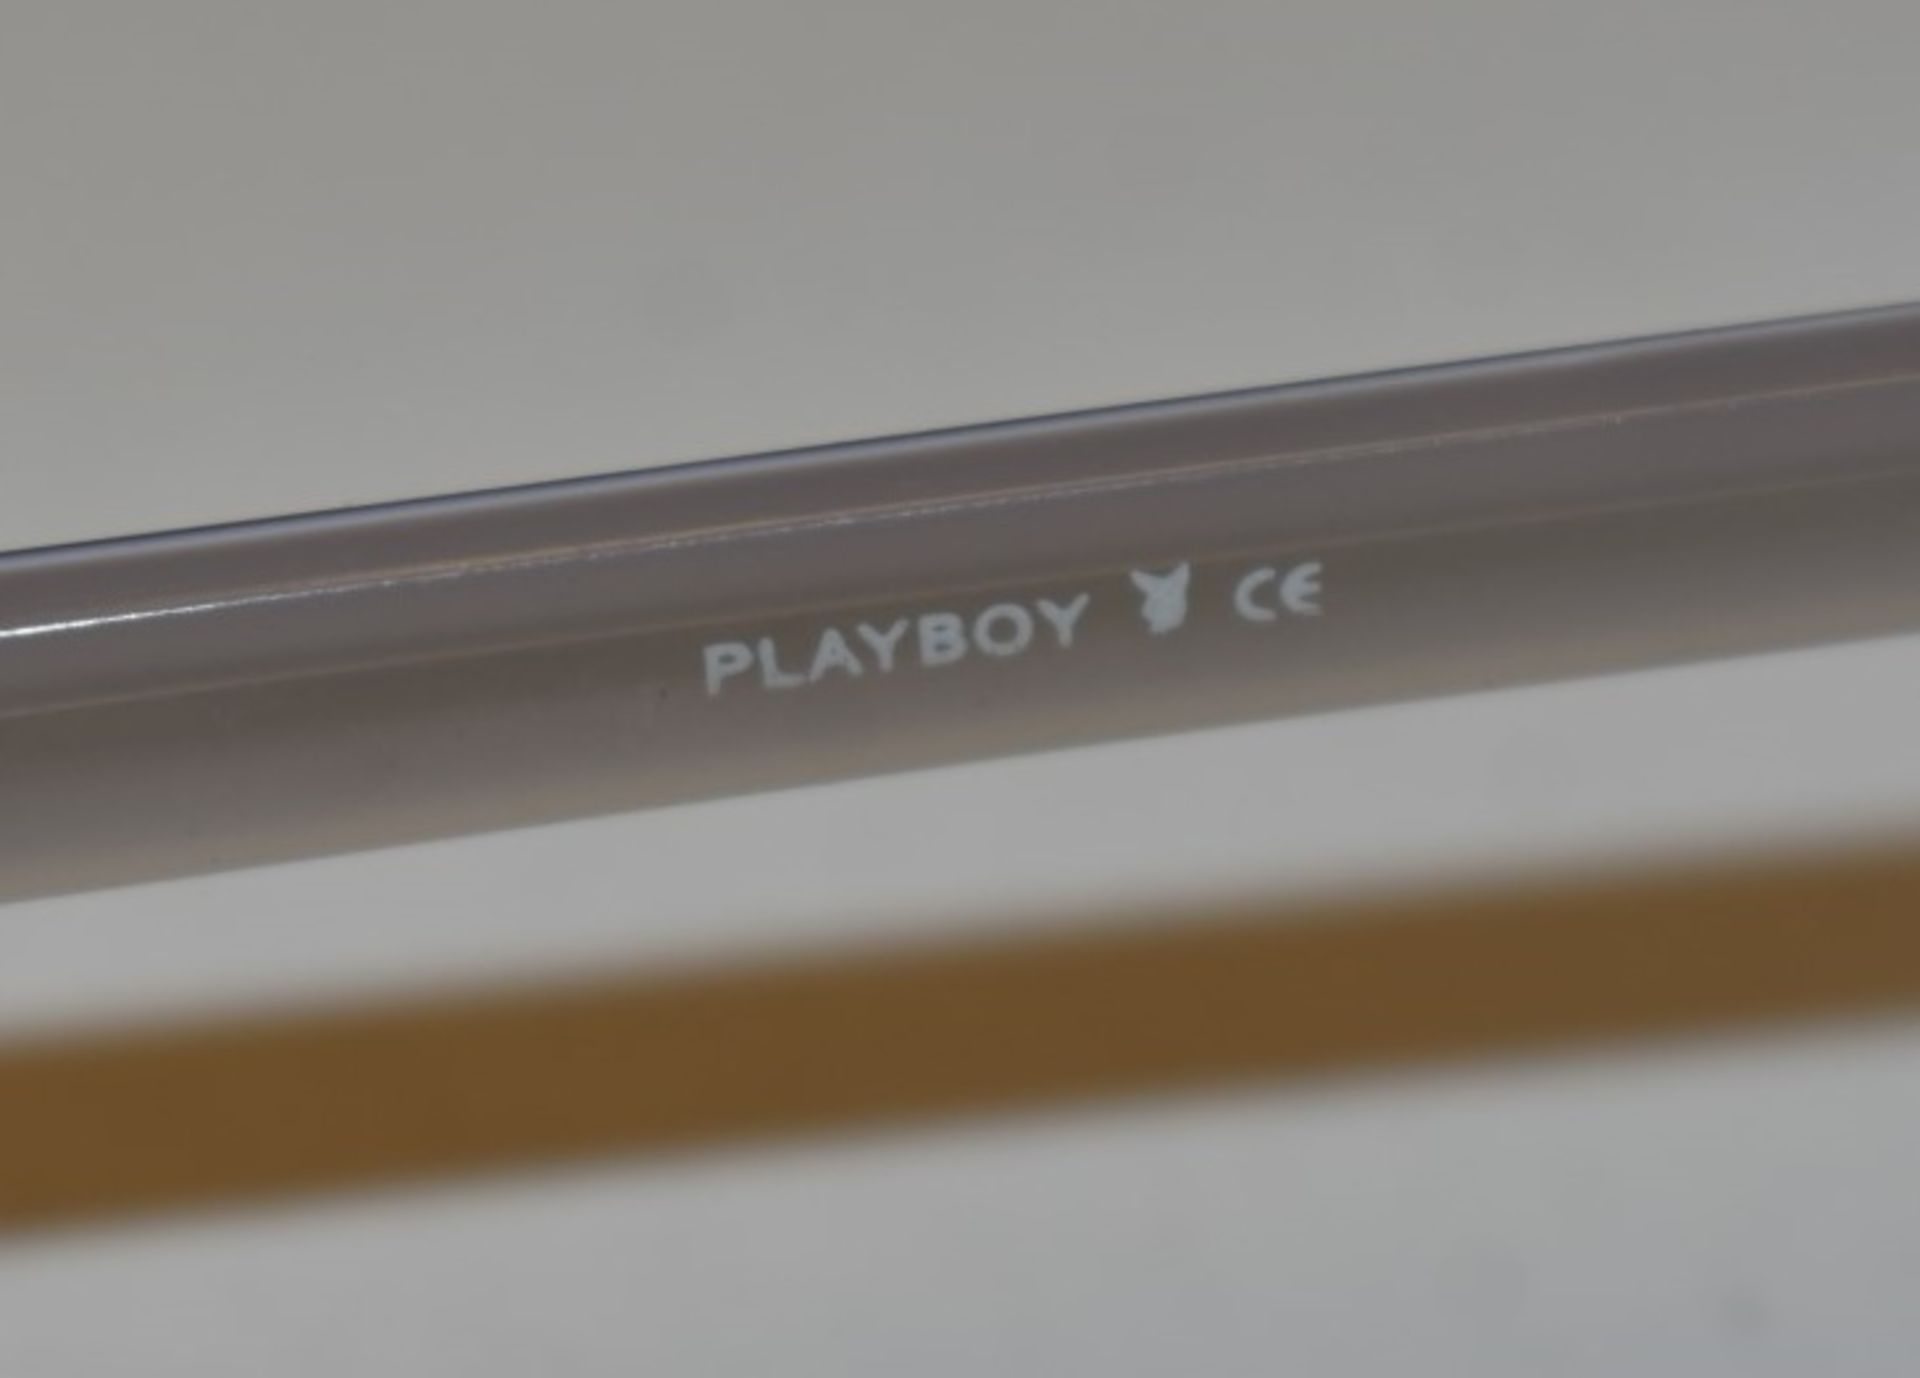 1 x Genuine PLAYBOY Spectacle Eye Glasses Frame - Ex Display Stock  - Ref: GTI178 - CL645 - - Image 8 of 12